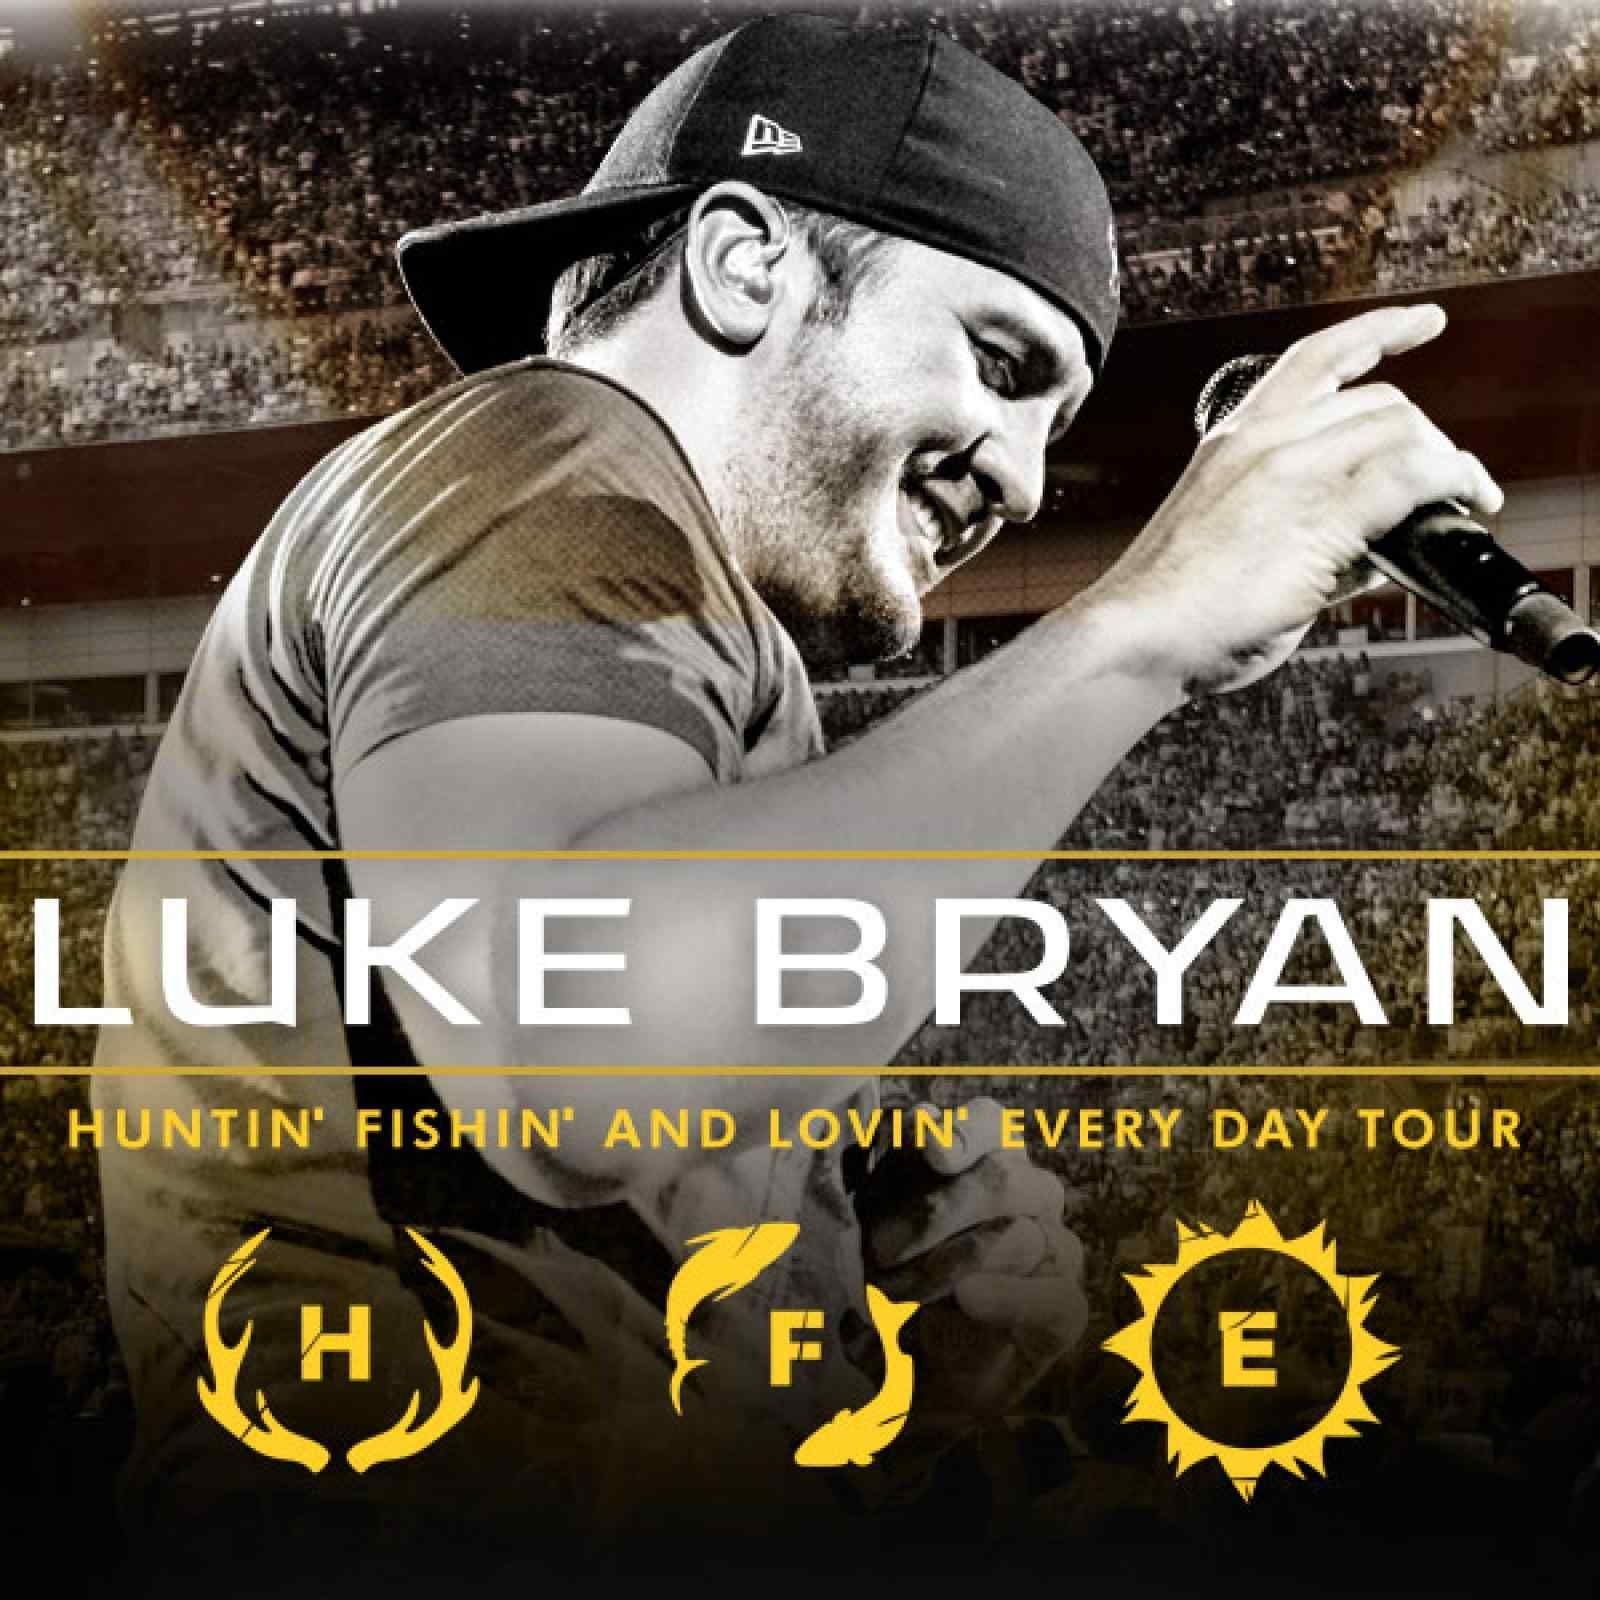 Luke's Tour Launch in Nashville Adds Second Show After Morning Sell-Out!